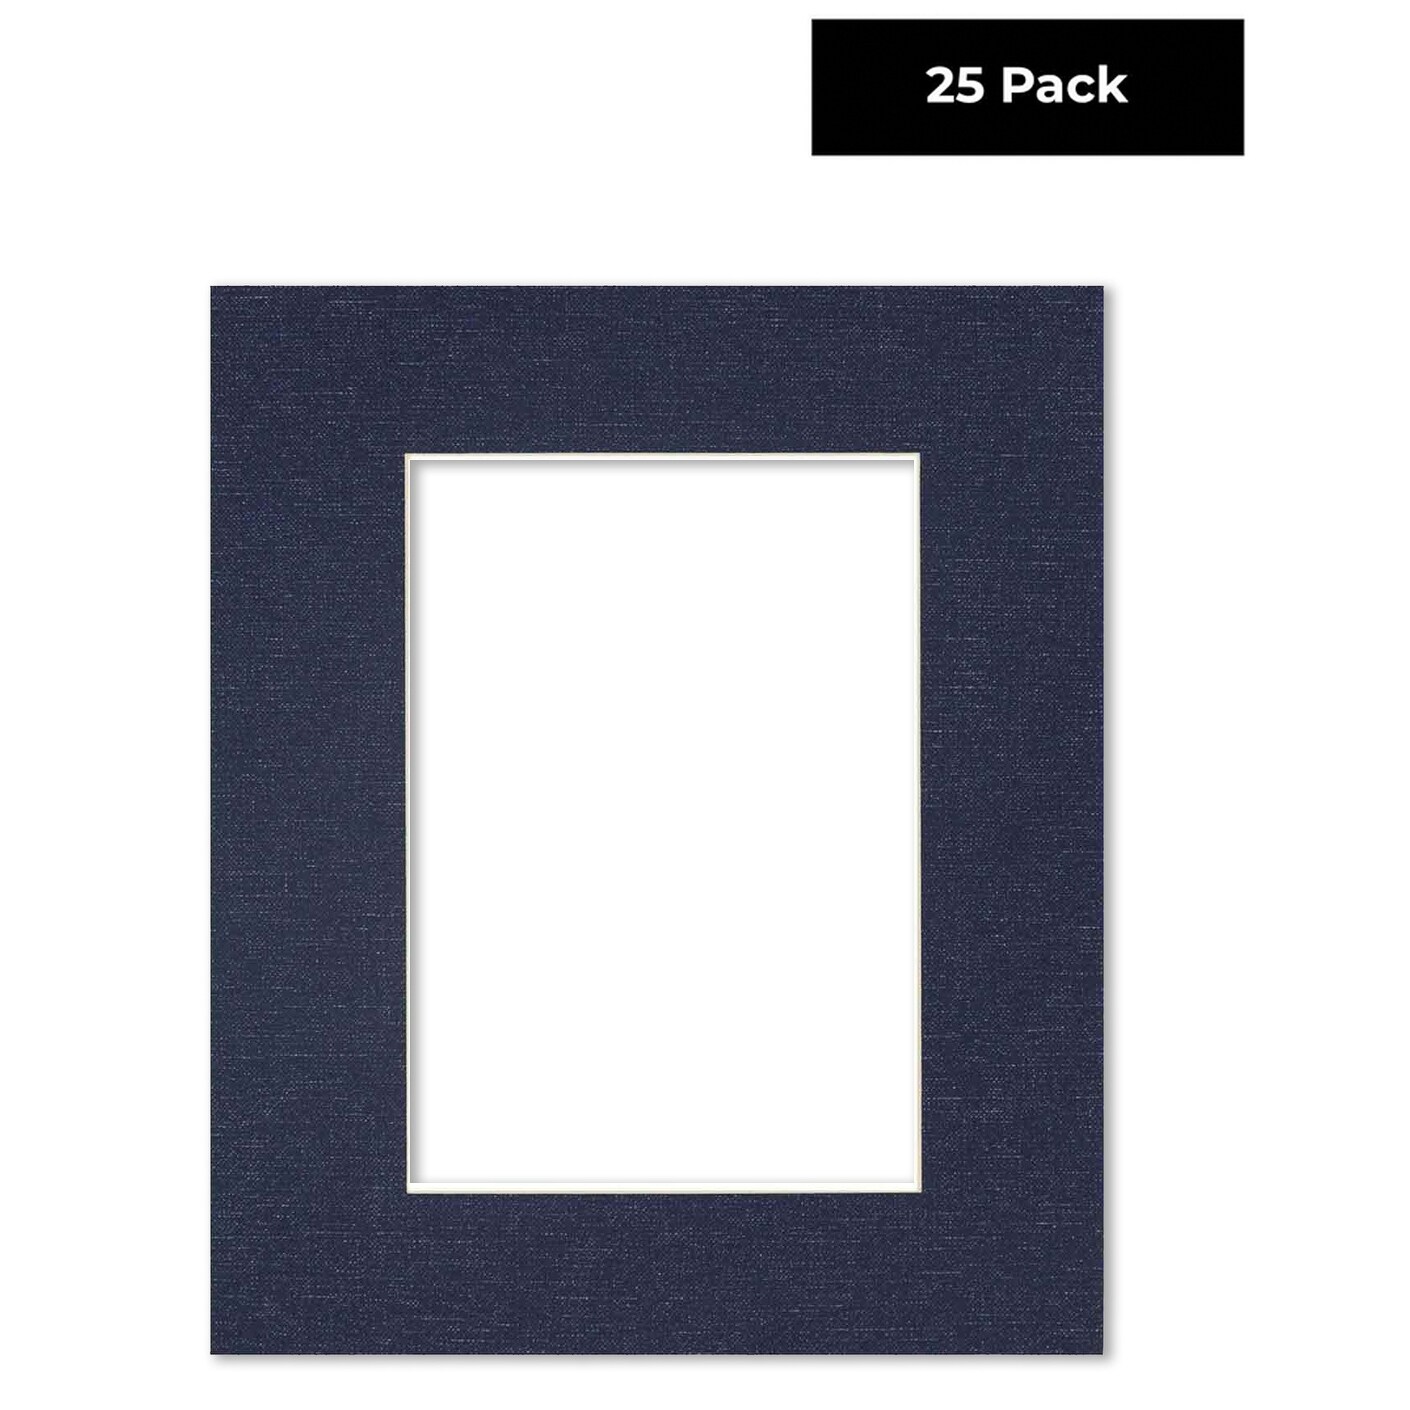 5x7 Mat for 8x10 Frame - Precut Mat Board Acid-Free Textured Cream 5x7 Photo Matte for A 8x10 Picture Frame - Off White